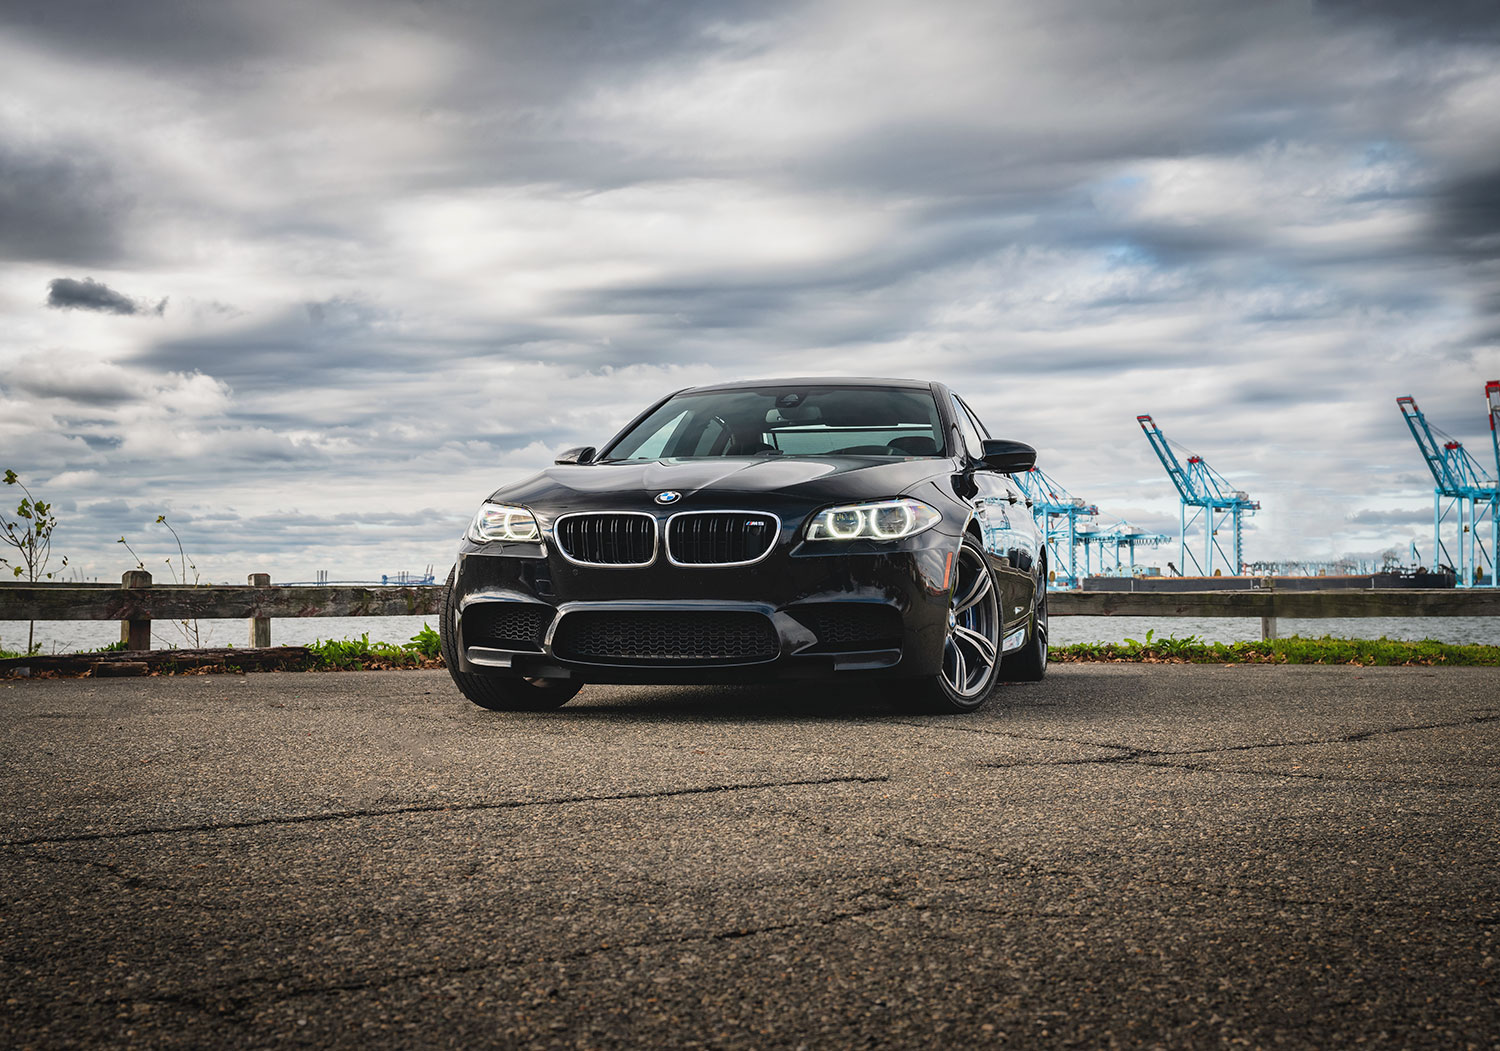 The BMW F10 M5 is the forgotten M car | Machines With Souls